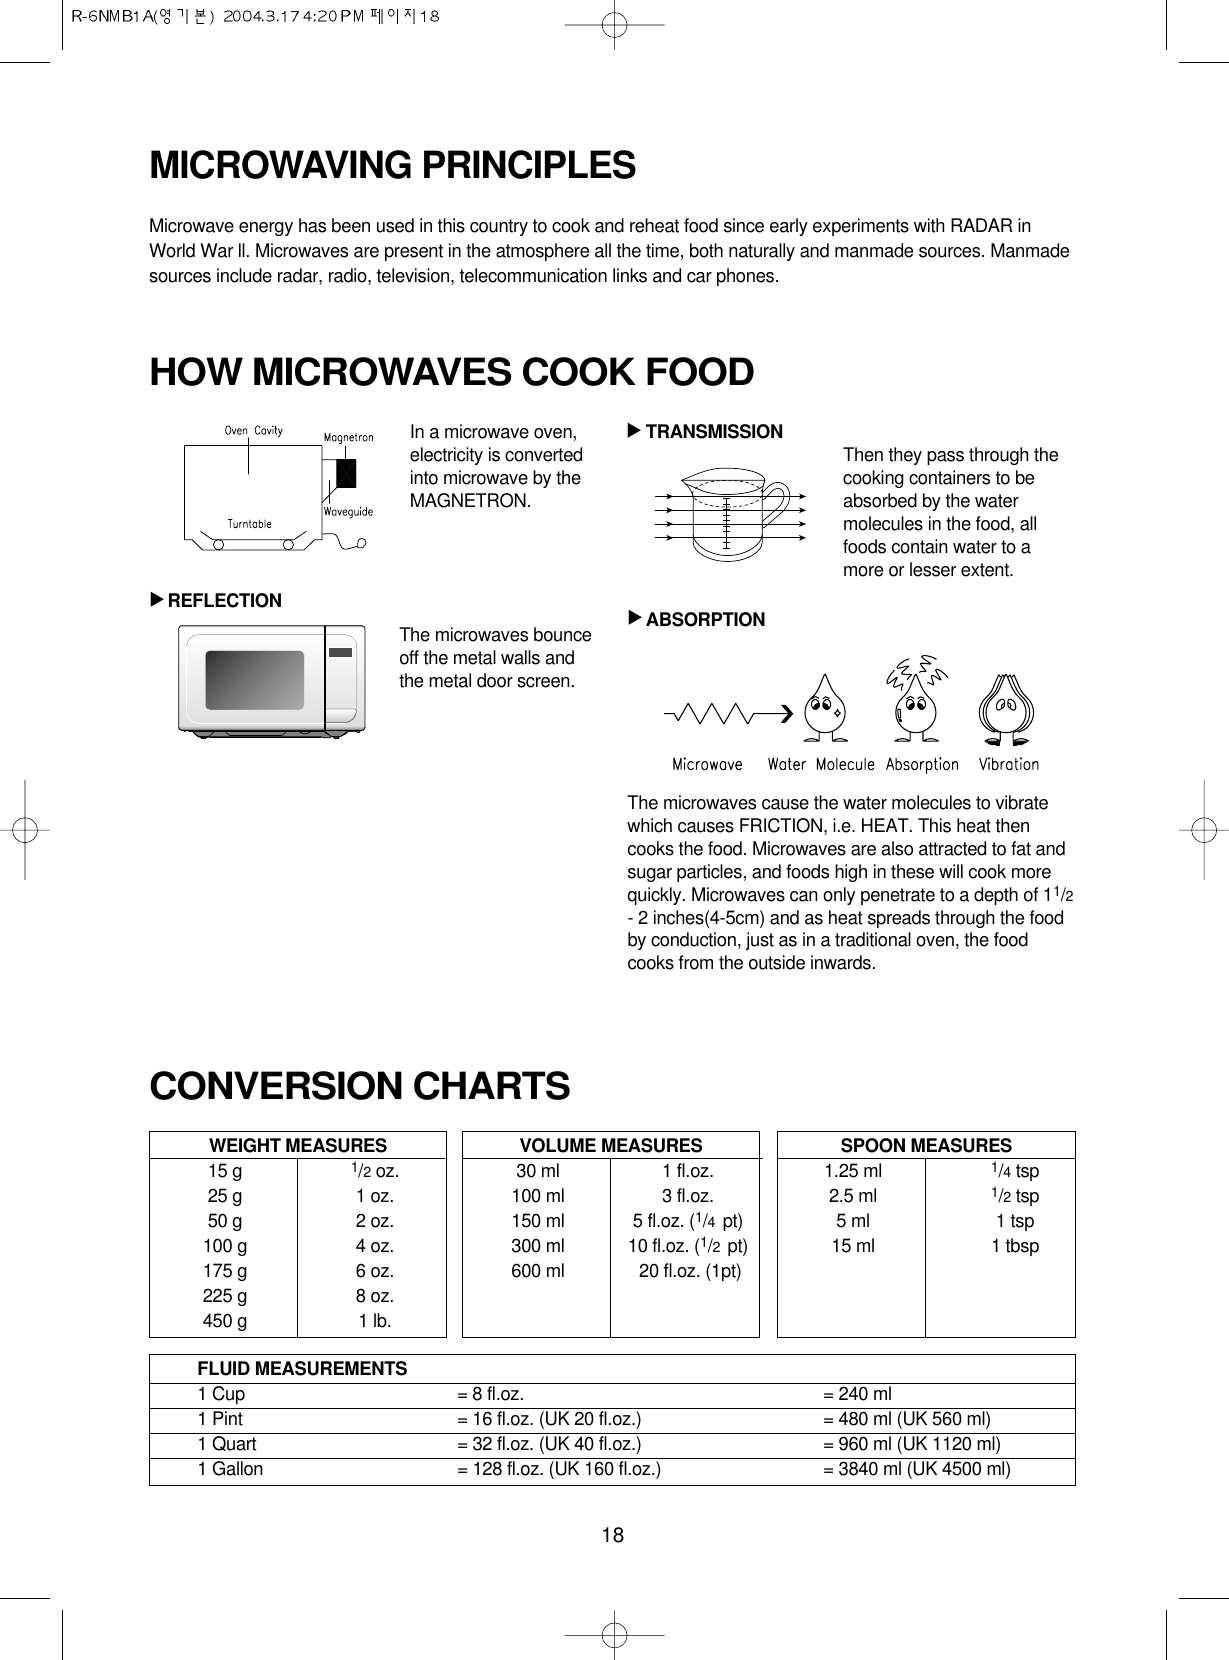 18MICROWAVING PRINCIPLESMicrowave energy has been used in this country to cook and reheat food since early experiments with RADAR inWorld War ll. Microwaves are present in the atmosphere all the time, both naturally and manmade sources. Manmadesources include radar, radio, television, telecommunication links and car phones.CONVERSION CHARTSIn a microwave oven,electricity is convertedinto microwave by theMAGNETRON.REFLECTIONTRANSMISSION Then they pass through thecooking containers to beabsorbed by the watermolecules in the food, allfoods contain water to amore or lesser extent.ABSORPTIONThe microwaves cause the water molecules to vibratewhich causes FRICTION, i.e. HEAT. This heat thencooks the food. Microwaves are also attracted to fat andsugar particles, and foods high in these will cook morequickly. Microwaves can only penetrate to a depth of 11/2- 2 inches(4-5cm) and as heat spreads through the foodby conduction, just as in a traditional oven, the foodcooks from the outside inwards.WEIGHT MEASURES15 g 1/2oz.25 g 1 oz.50 g 2 oz.100 g 4 oz.175 g 6 oz.225 g 8 oz.450 g 1 lb.HOW MICROWAVES COOK FOOD▲▲▲VOLUME MEASURES30 ml 1 fl.oz.100 ml 3 fl.oz.150 ml 5 fl.oz. (1/4  pt)300 ml 10 fl.oz. (1/2  pt)600 ml 20 fl.oz. (1pt)SPOON MEASURES1.25 ml 1/4tsp2.5 ml 1/2tsp5 ml 1 tsp15 ml 1 tbspFLUID MEASUREMENTS1 Cup = 8 fl.oz. = 240 ml1 Pint = 16 fl.oz. (UK 20 fl.oz.) = 480 ml (UK 560 ml)1 Quart = 32 fl.oz. (UK 40 fl.oz.) = 960 ml (UK 1120 ml)1 Gallon = 128 fl.oz. (UK 160 fl.oz.) = 3840 ml (UK 4500 ml)The microwaves bounceoff the metal walls andthe metal door screen.